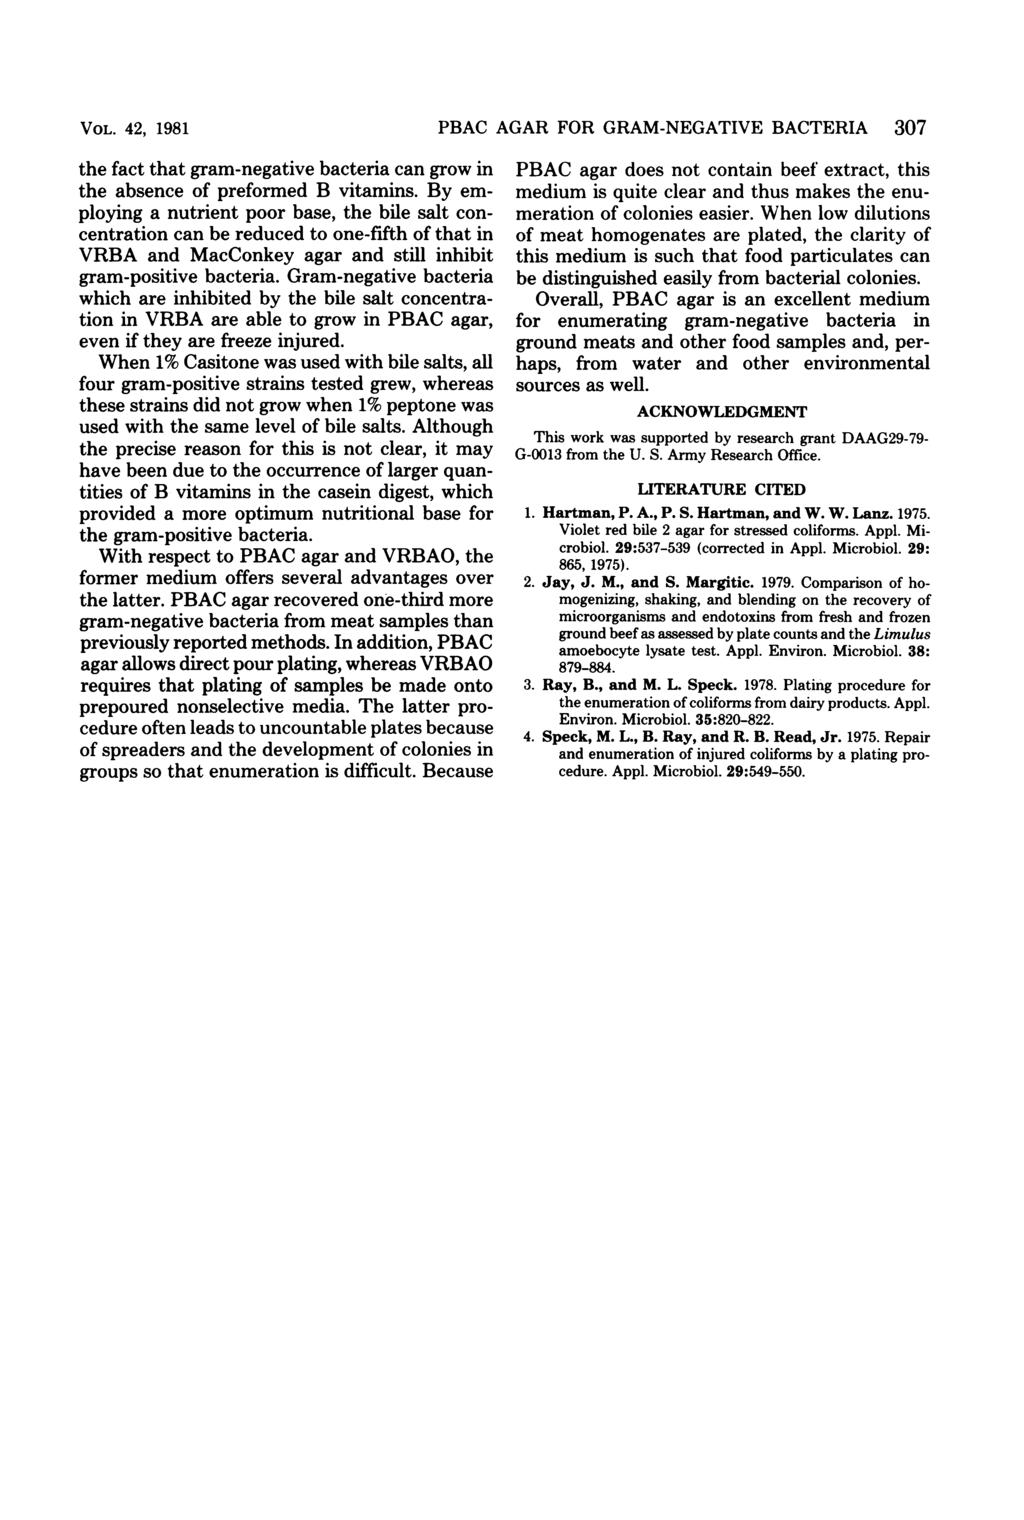 VOL. 42, 1981 the fact that gram-negative bacteria can grow in the absence of preformed B vitamins.